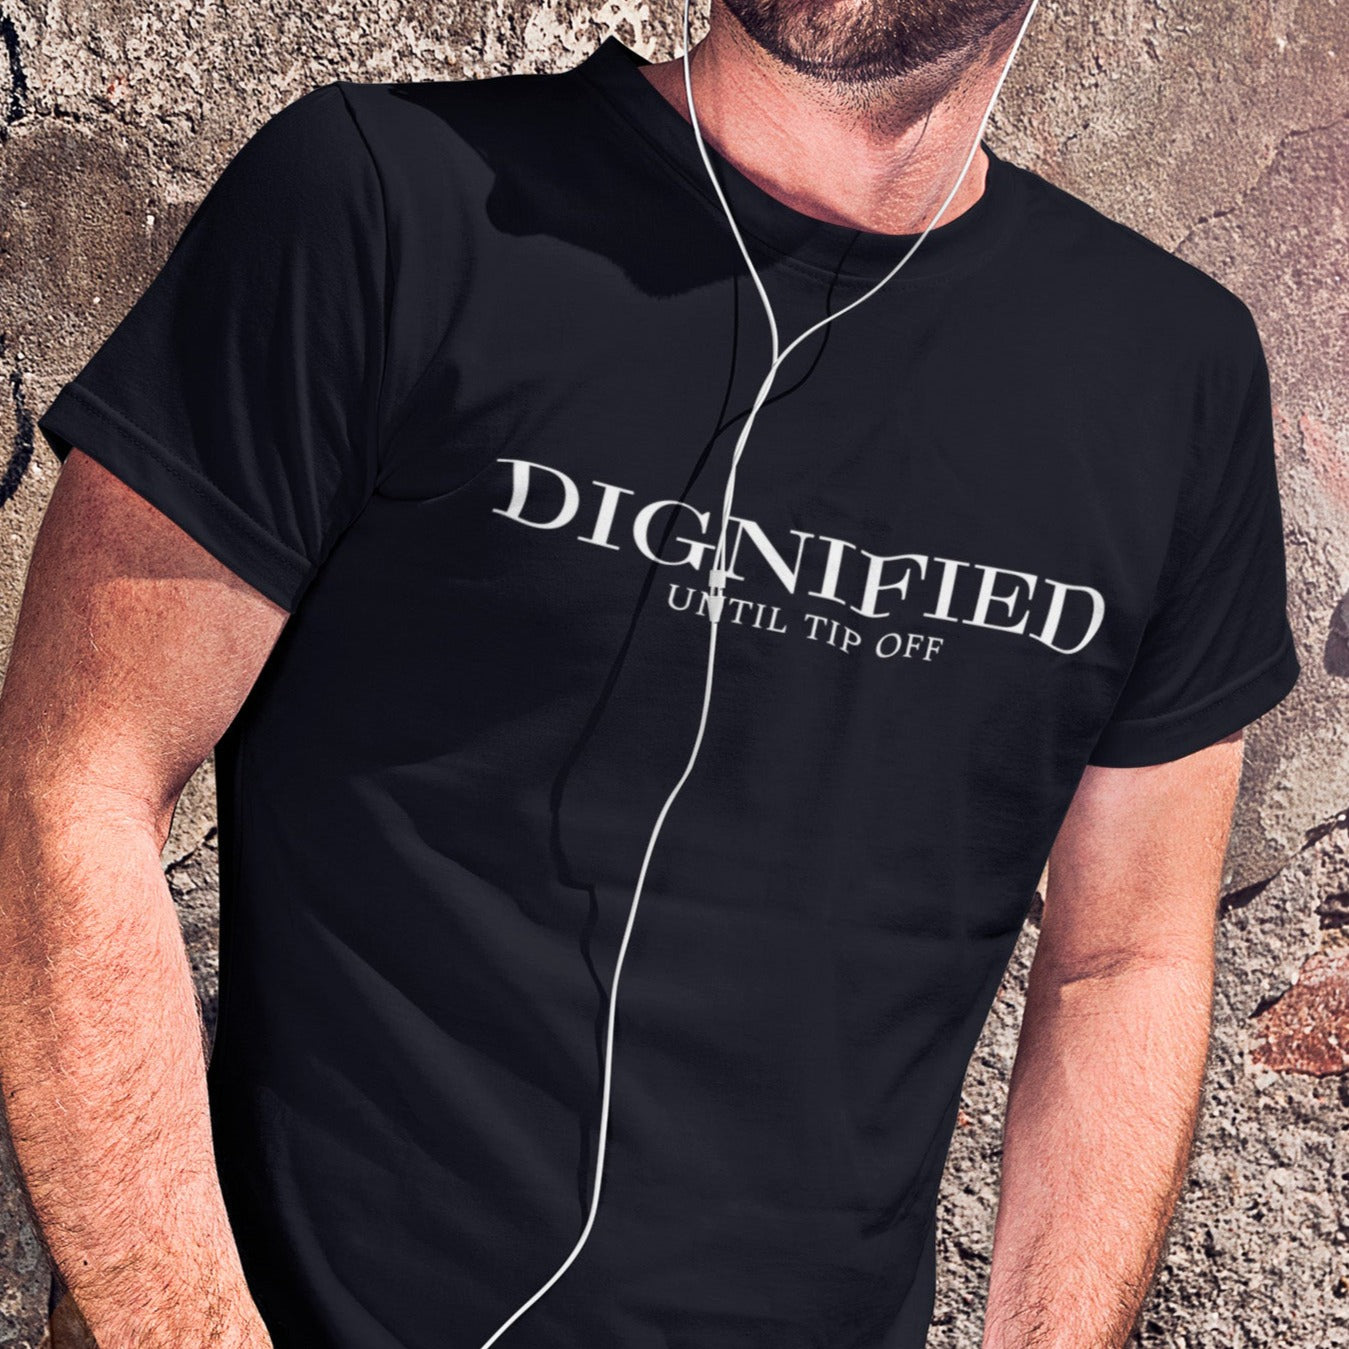 dignified-until-tipoff-black-t-shirt-mens-sports-basketball-cropped-face-mockup-of-a-man-wearing-a-crew-neck-tee-and-listening-to-music